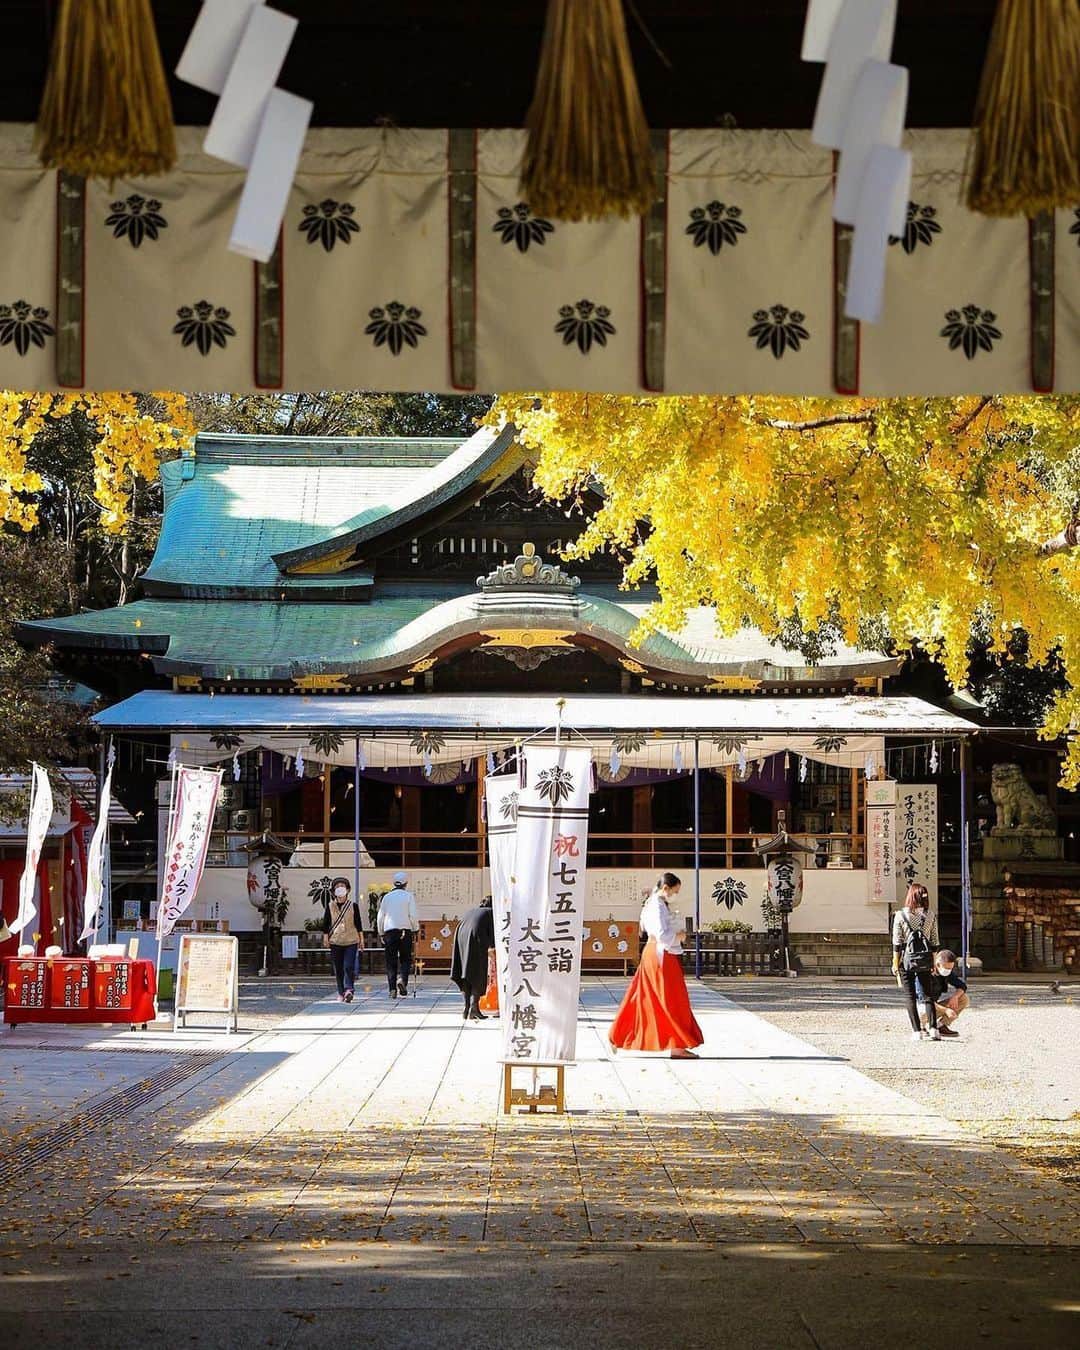 Promoting Tokyo Culture都庁文化振興部のインスタグラム：「Omiya Hachimangu Shrine is a well-known shrine that brings good luck for marriage, childbirth, and child-rearing.  Many people visit the shrine every year for Shichi-Go-San, a traditional Japanese celebration for 3 and 7-year-old girls, and 5 and sometimes 3-year-old boys. Typically held in mid-November, this festival is a joyful occasion, marked by the sight of golden gingko trees gracing the shrine's surroundings.  子供の健やかな成長を3歳・5・7歳を節目に祝い祈願する11月の伝統行事「七五三」。 杉並区の「大宮八幡宮」は縁結び・安産・子育てにご利益のある神社として親しまれており、毎年多くの方々が七五三のお参りに足を運びます。 黄色く色づいた銀杏の木が境内を彩る光景もまた、この時期ならではです。  #tokyoartsandculture 📸: @ariel.land  #suginamiku #Ginkgo #杉並区 #大宮八幡宮 #銀杏 #紅葉 #japantraditional #japanculture  #artandculture #artculture #culturalexperience #artexperience #culturetrip #theculturetrip #japantrip #tokyotrip #tokyophotography #tokyojapan  #tokyotokyo #explorejpn #unknownjapan #discoverjapan #japan_of_insta  #nipponpic  #japanfocus #japanesestyle #artphoto #artstagram」